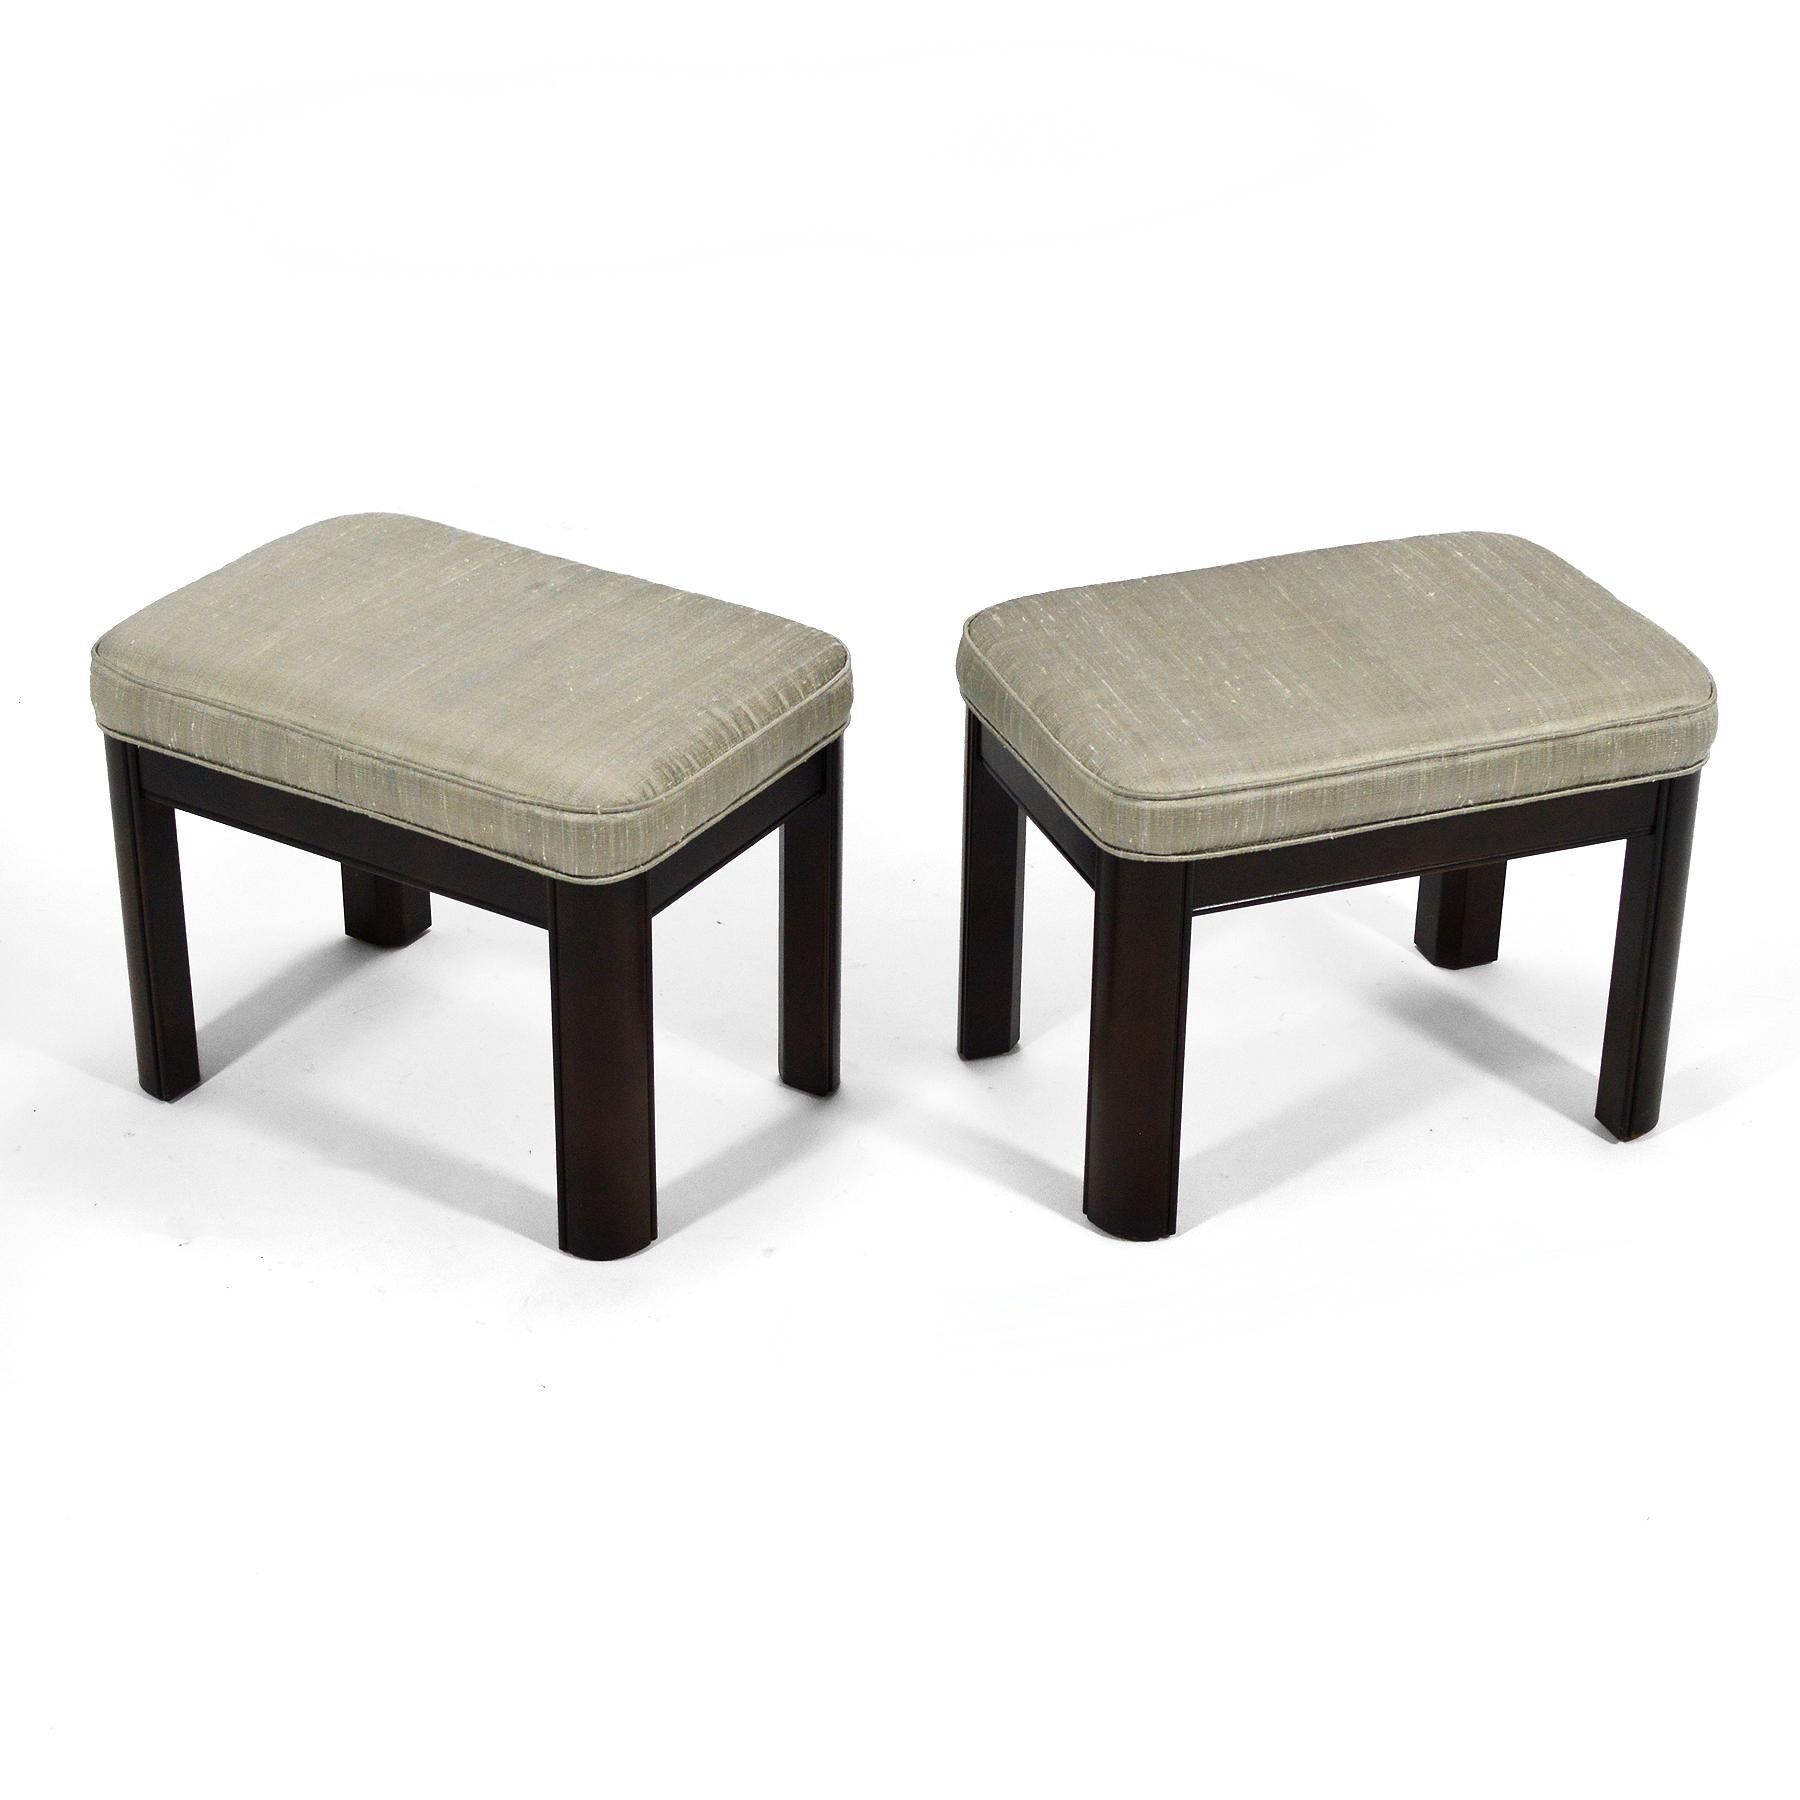 Pair of Gordon's Stools Upholstered in Silk In Good Condition For Sale In Highland, IN